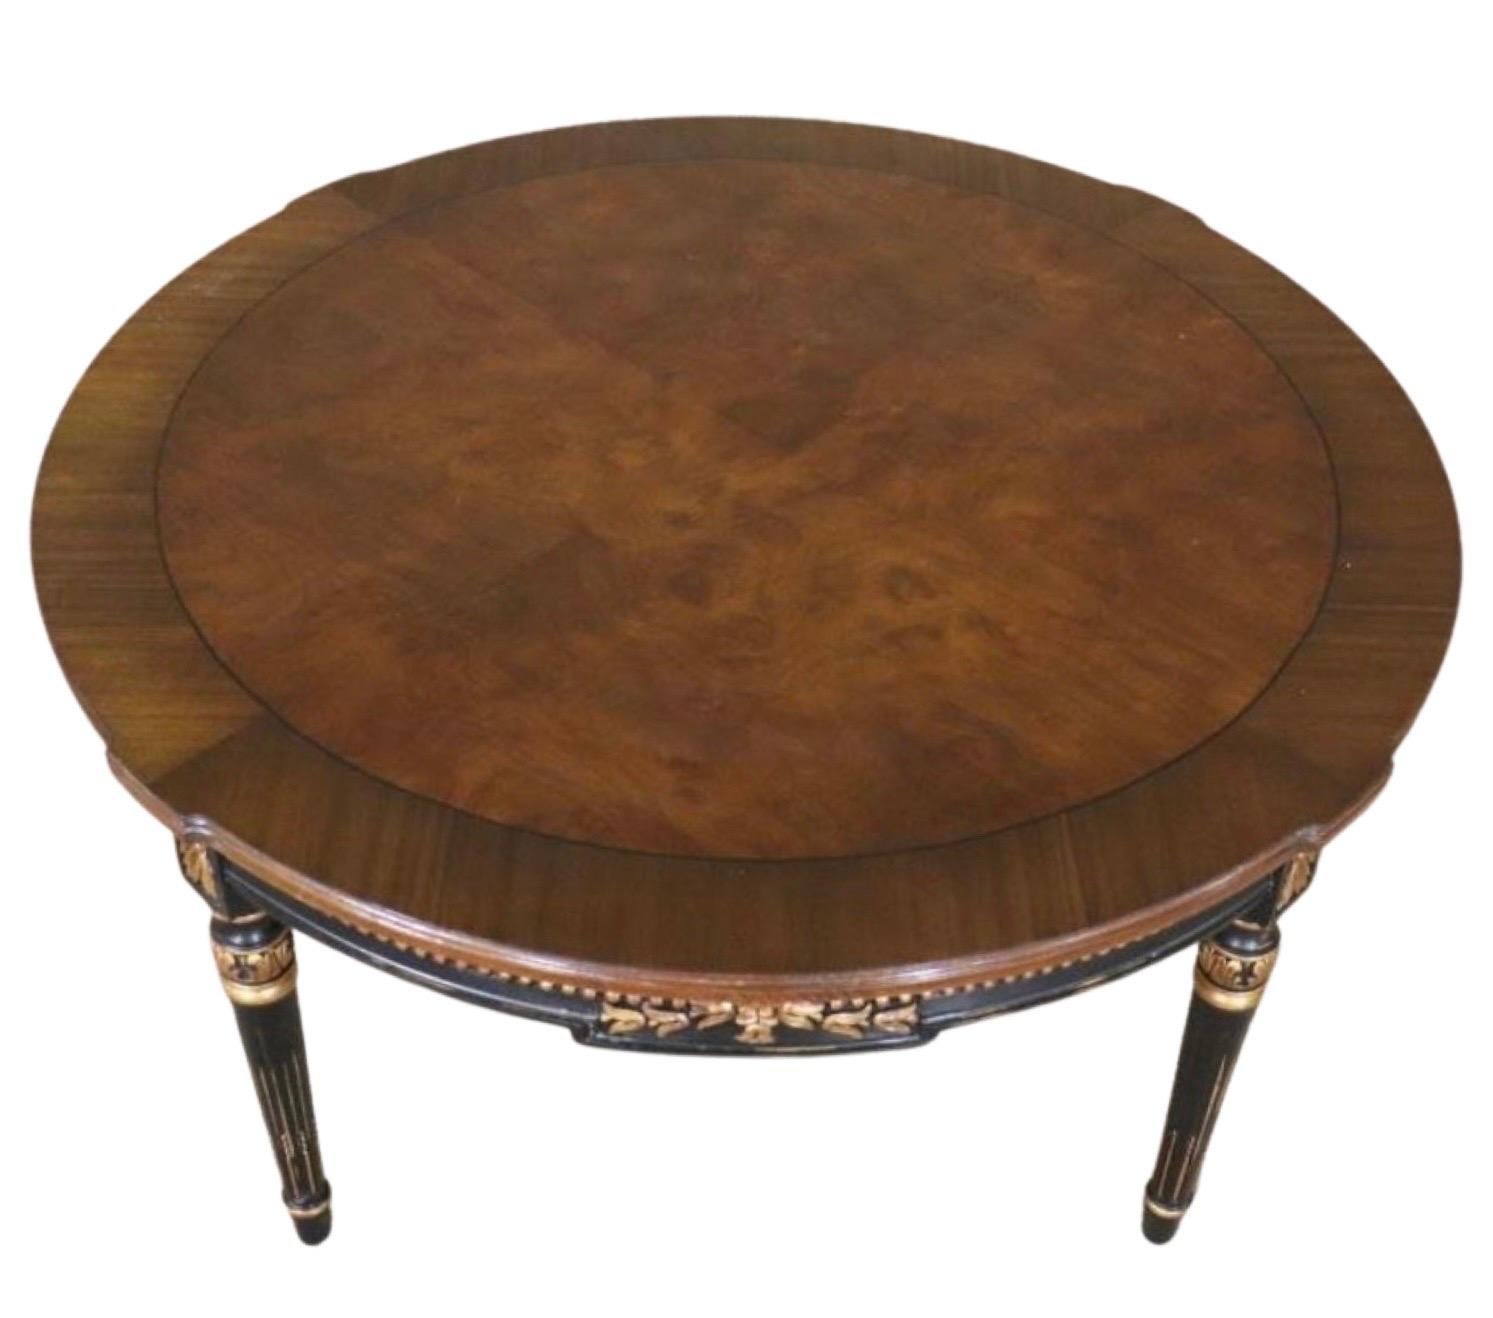 Magnificent Directoire cocktail table by Karges Furniture, early 2000's.

This exceptional table celebrates beautifully hand-carved details that include hand-painted gold leaf rosettes, a bead and floral carving on the apron, and fluted legs with a